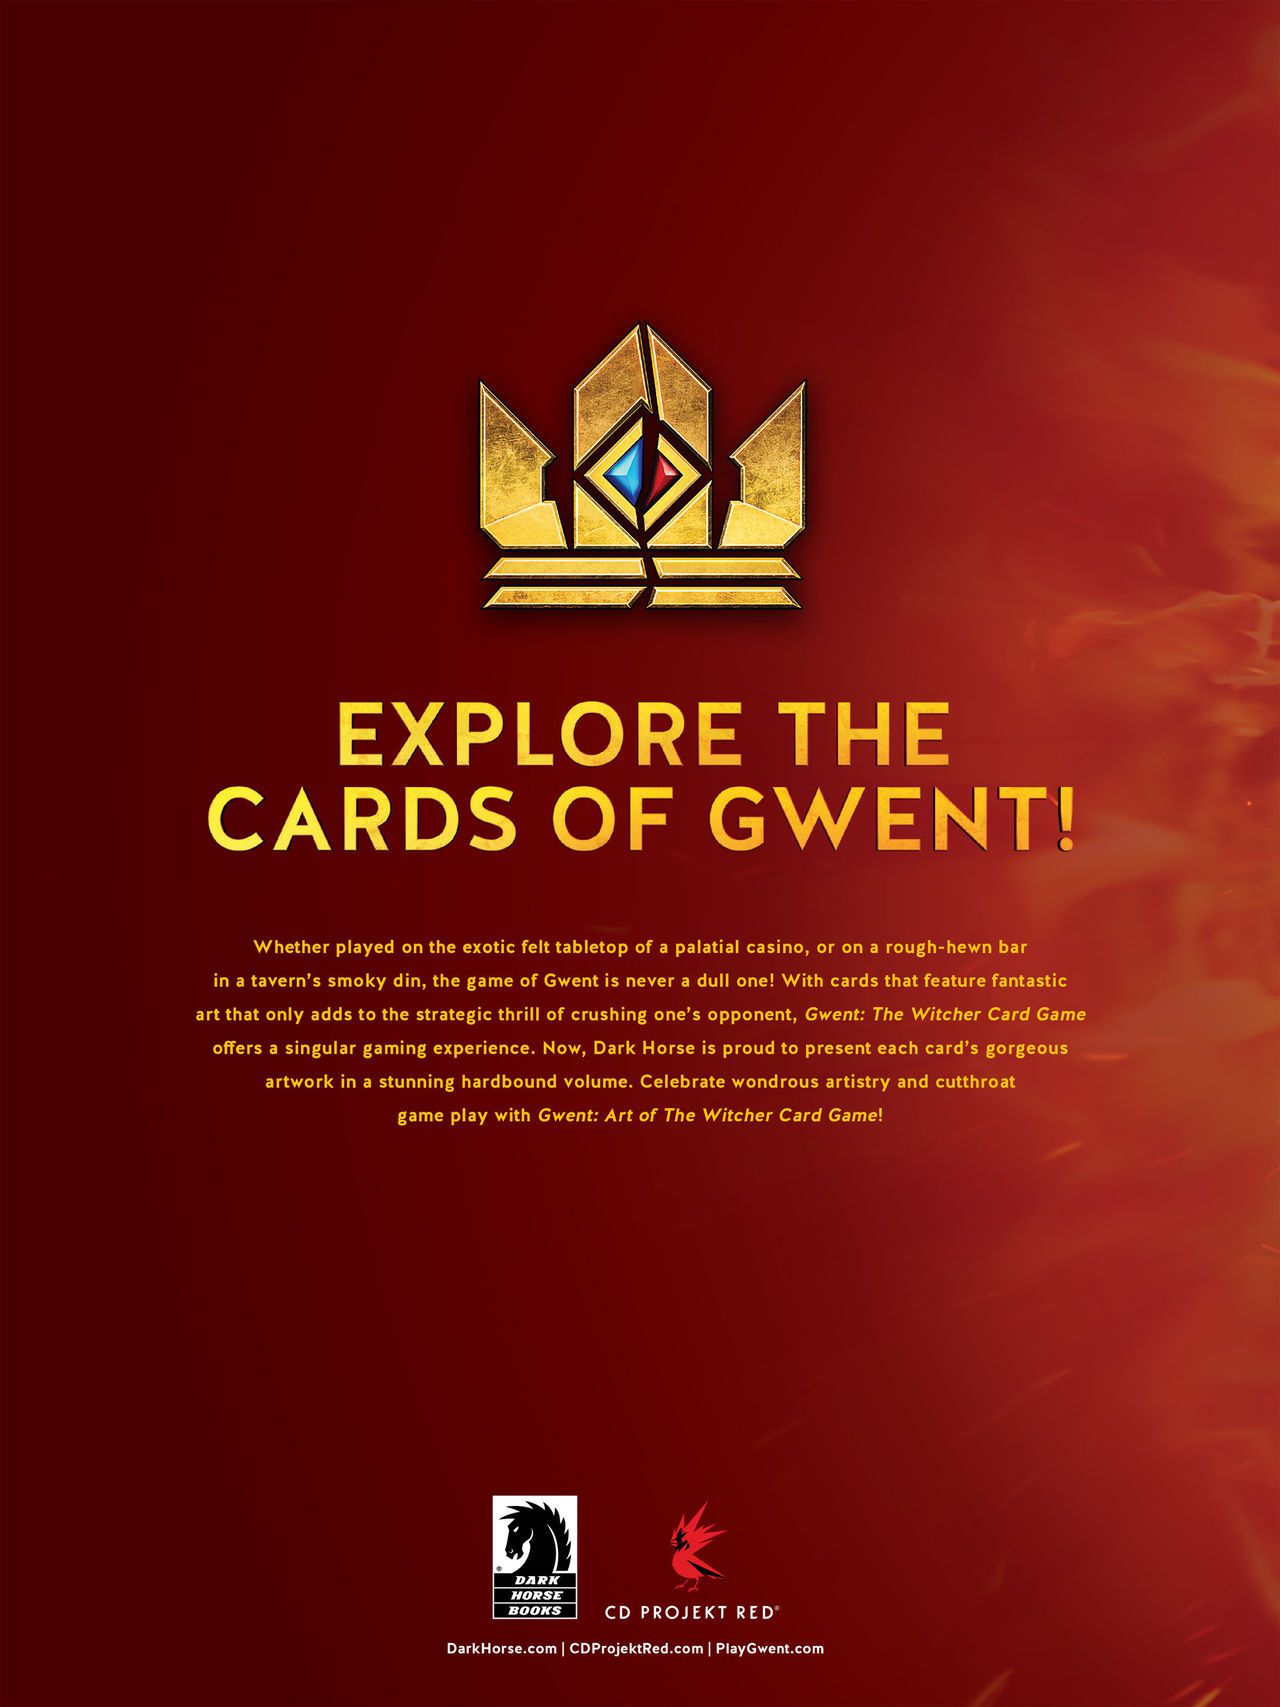 Gwent - Art of the Witcher Card Game 233